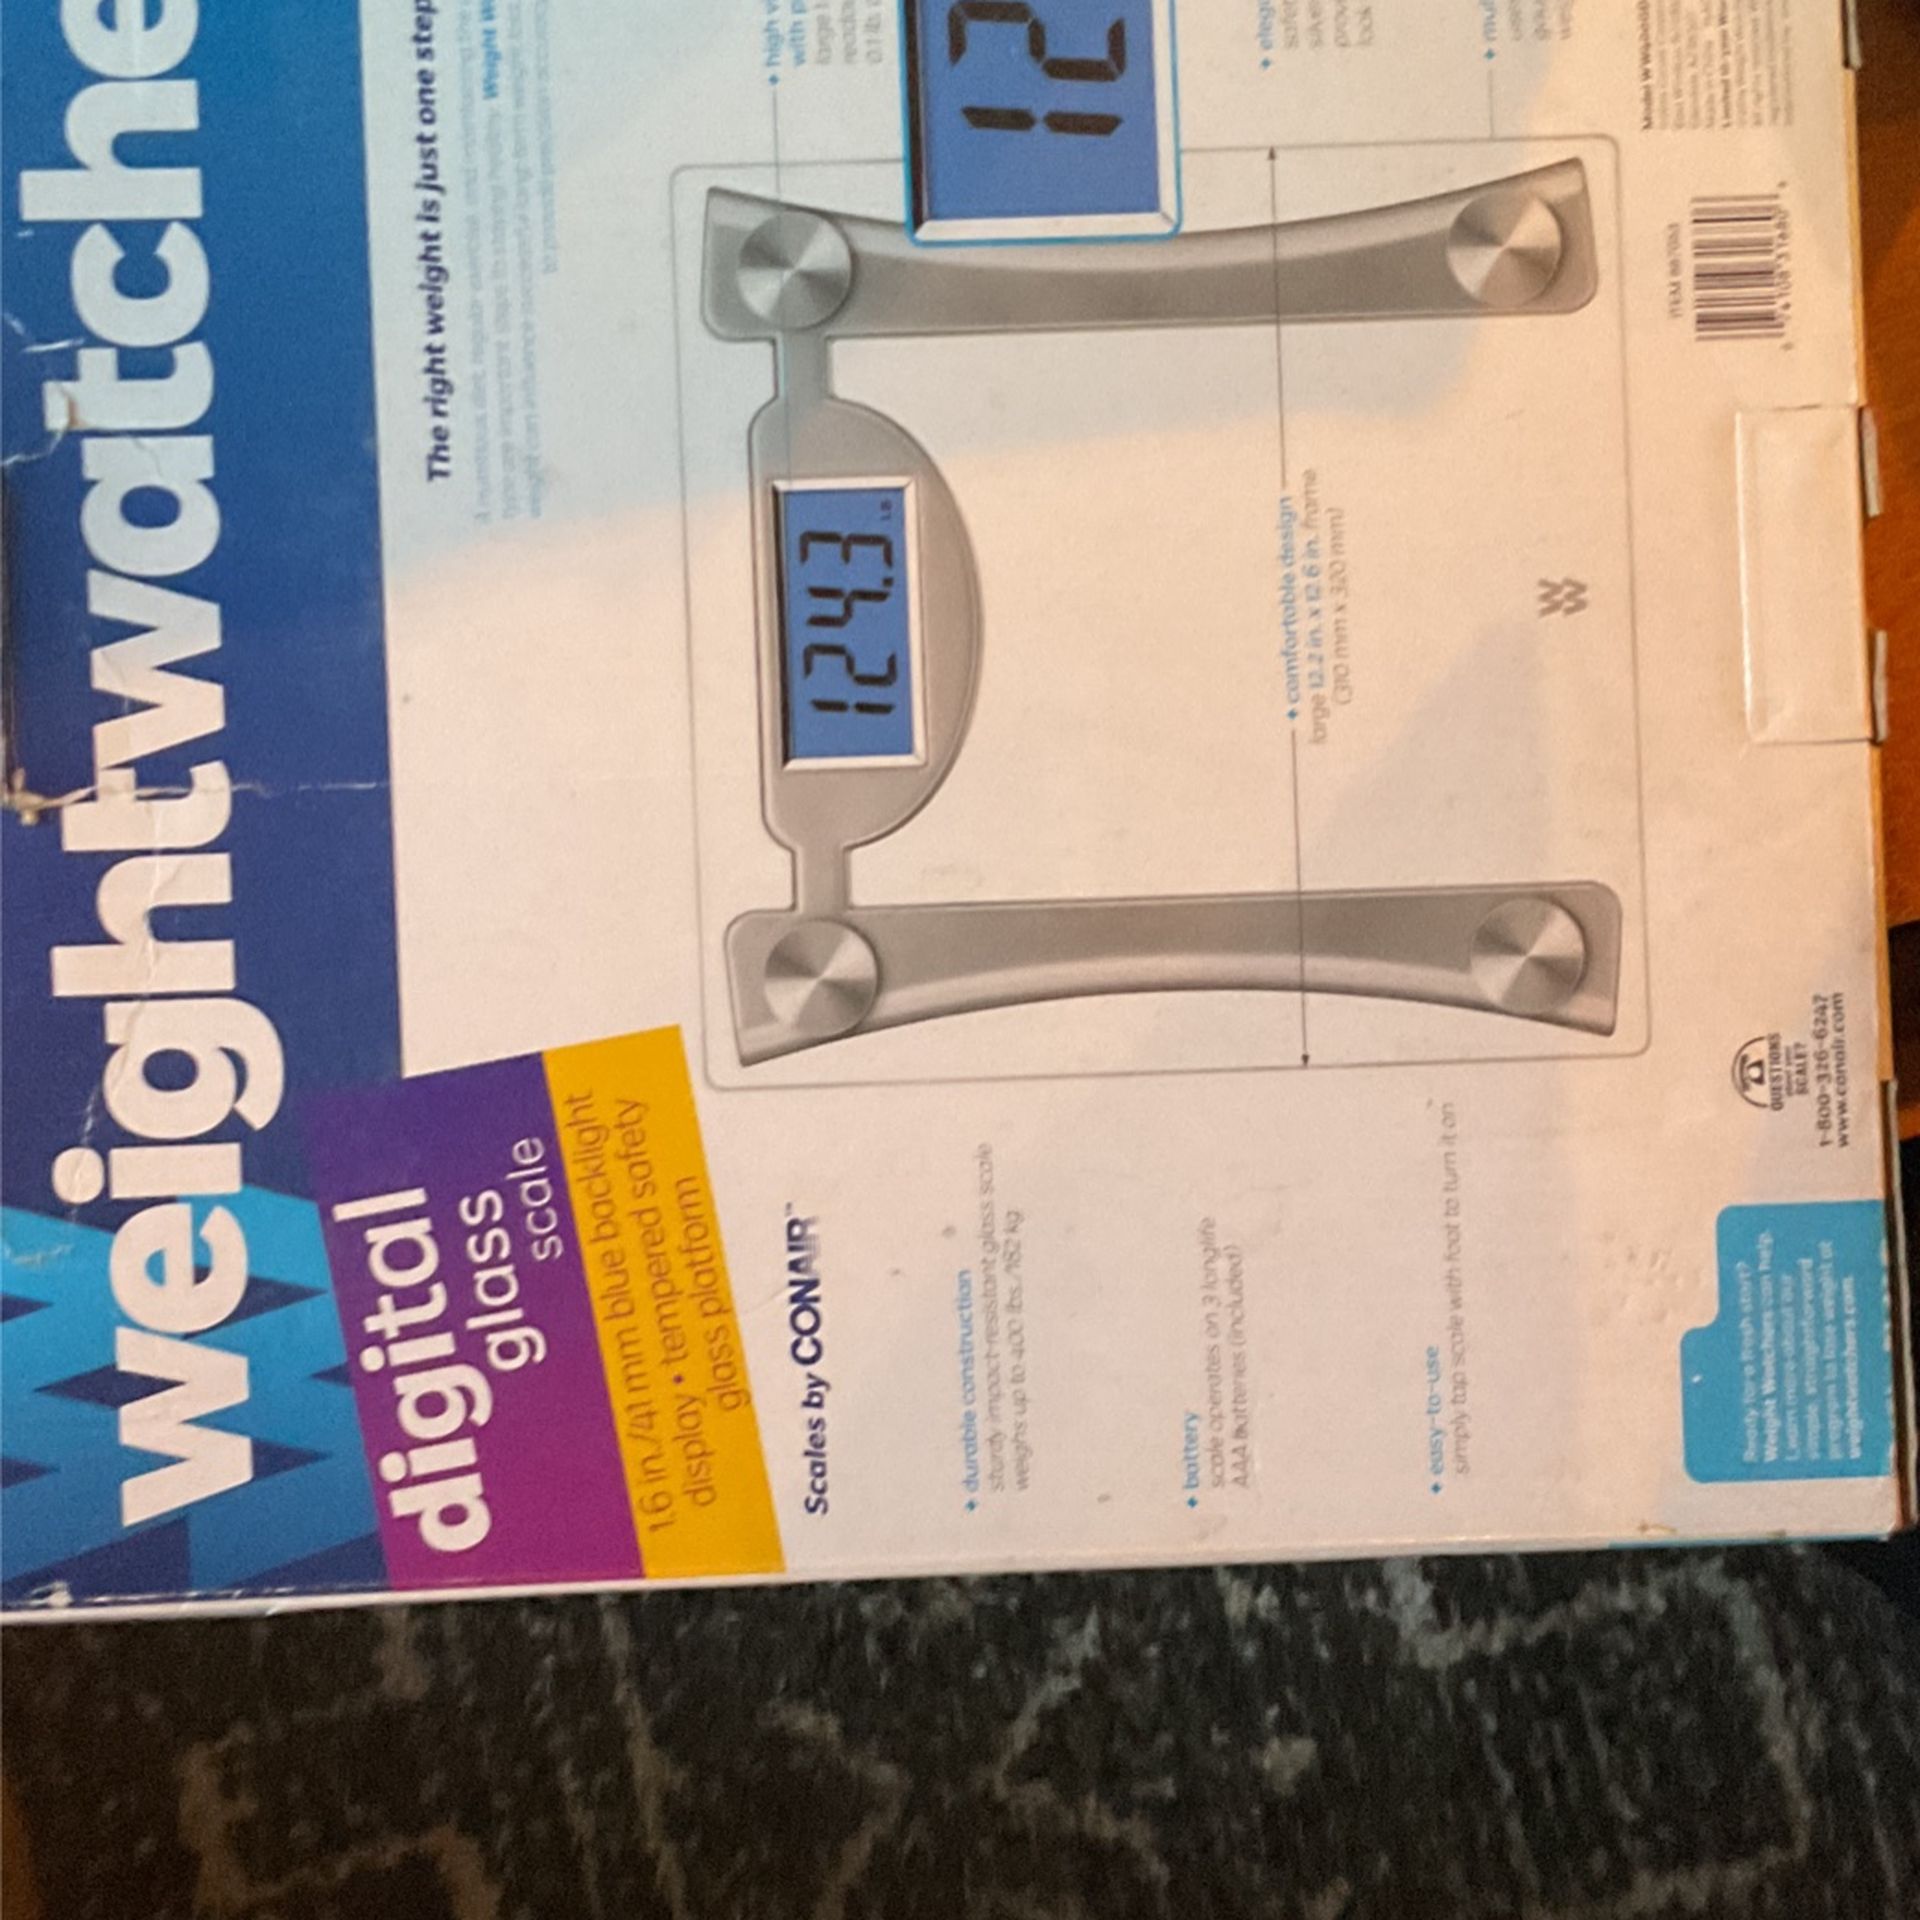 Weight Watchers Digital Scale For The Bathroom New